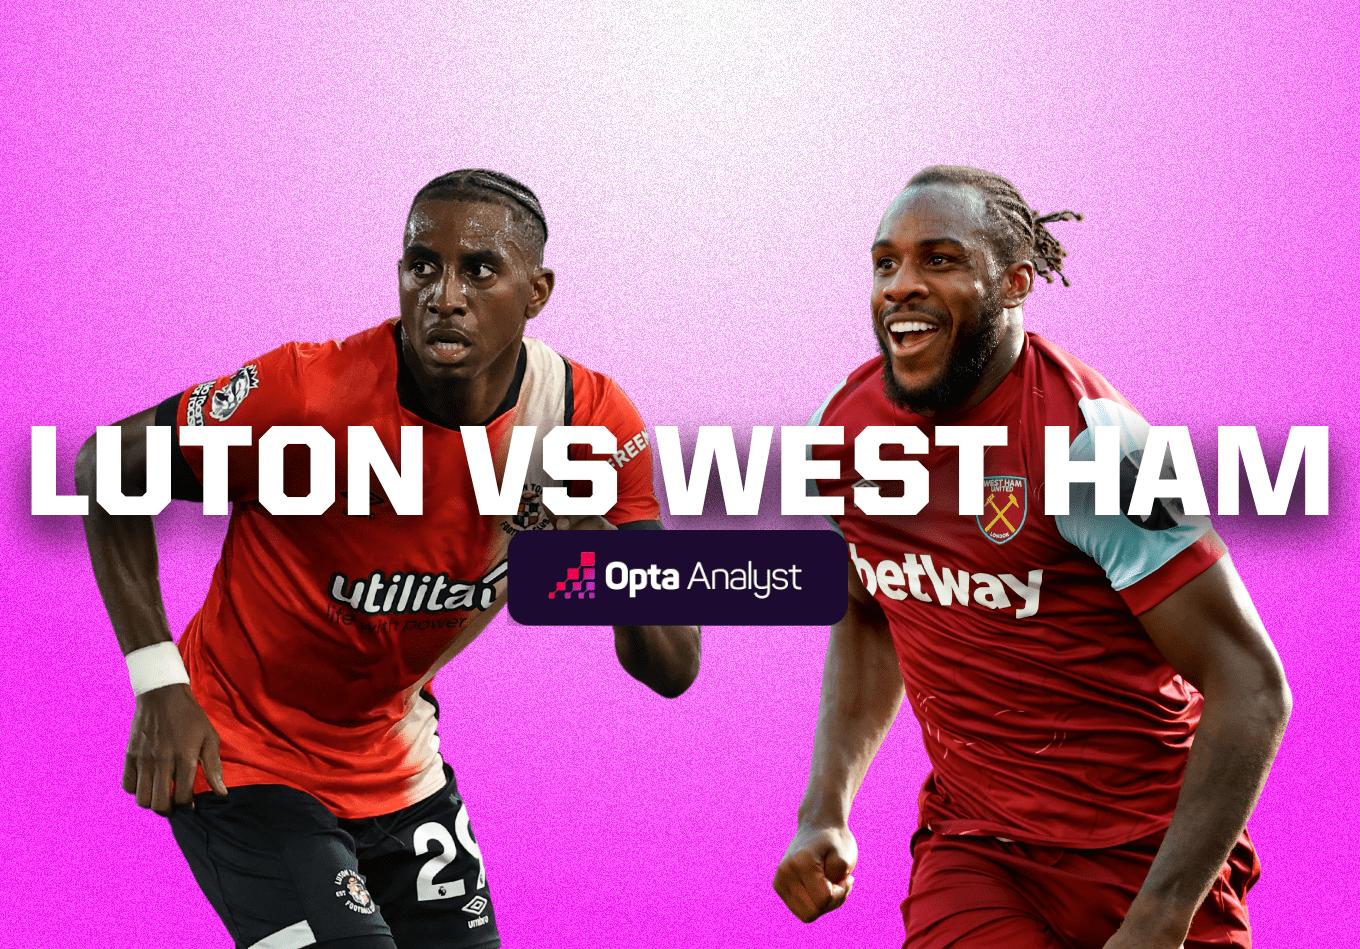 Luton Town vs West Ham United: Prediction and Preview